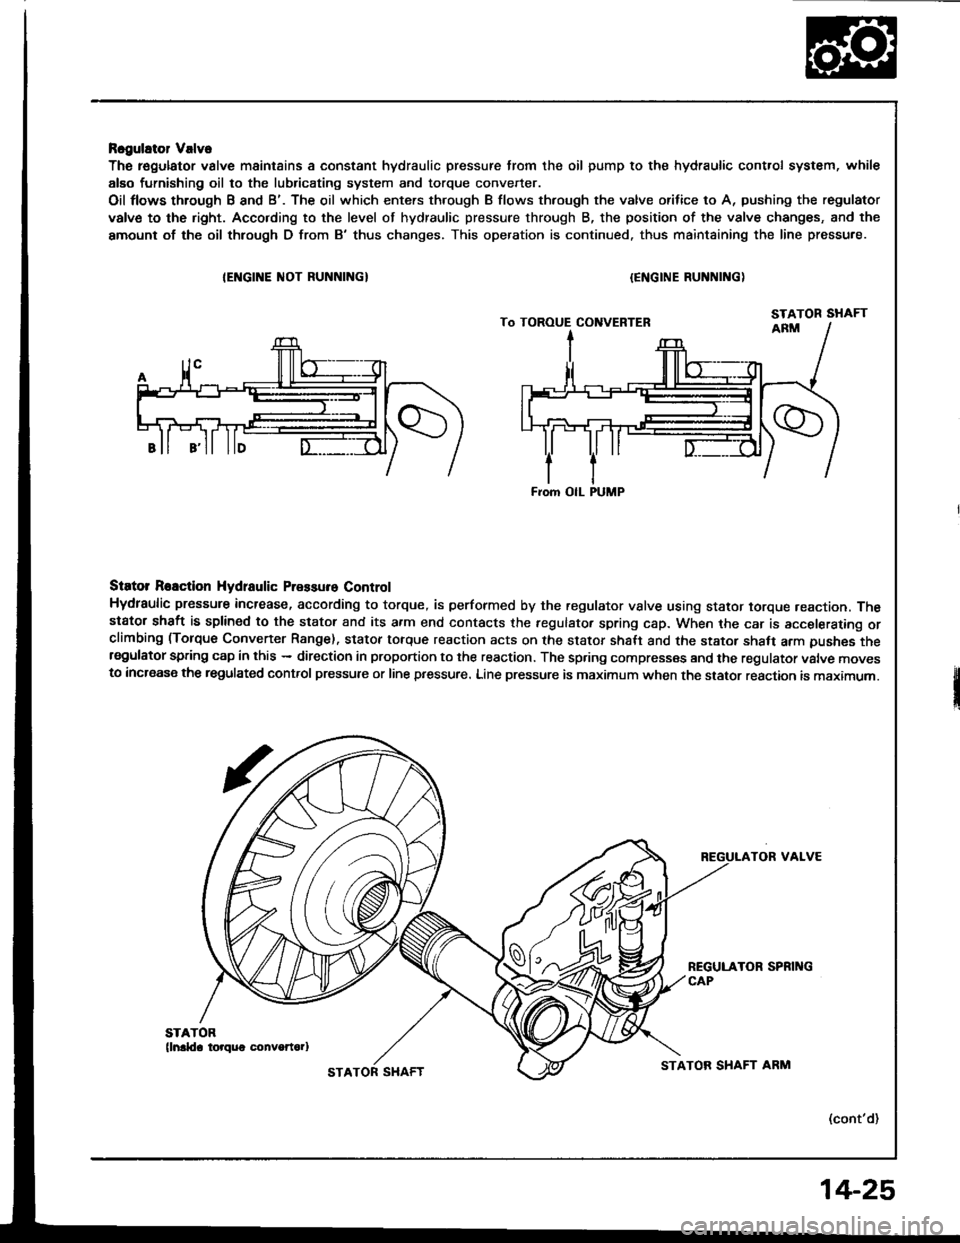 HONDA INTEGRA 1994 4.G User Guide Rcgulator Valve
The r€gulator valve maintains a constant hydraulic pressure from the oil pump to the hydraulic control system, whil€
alEo furnishing oil to the lubricating system and torque conven